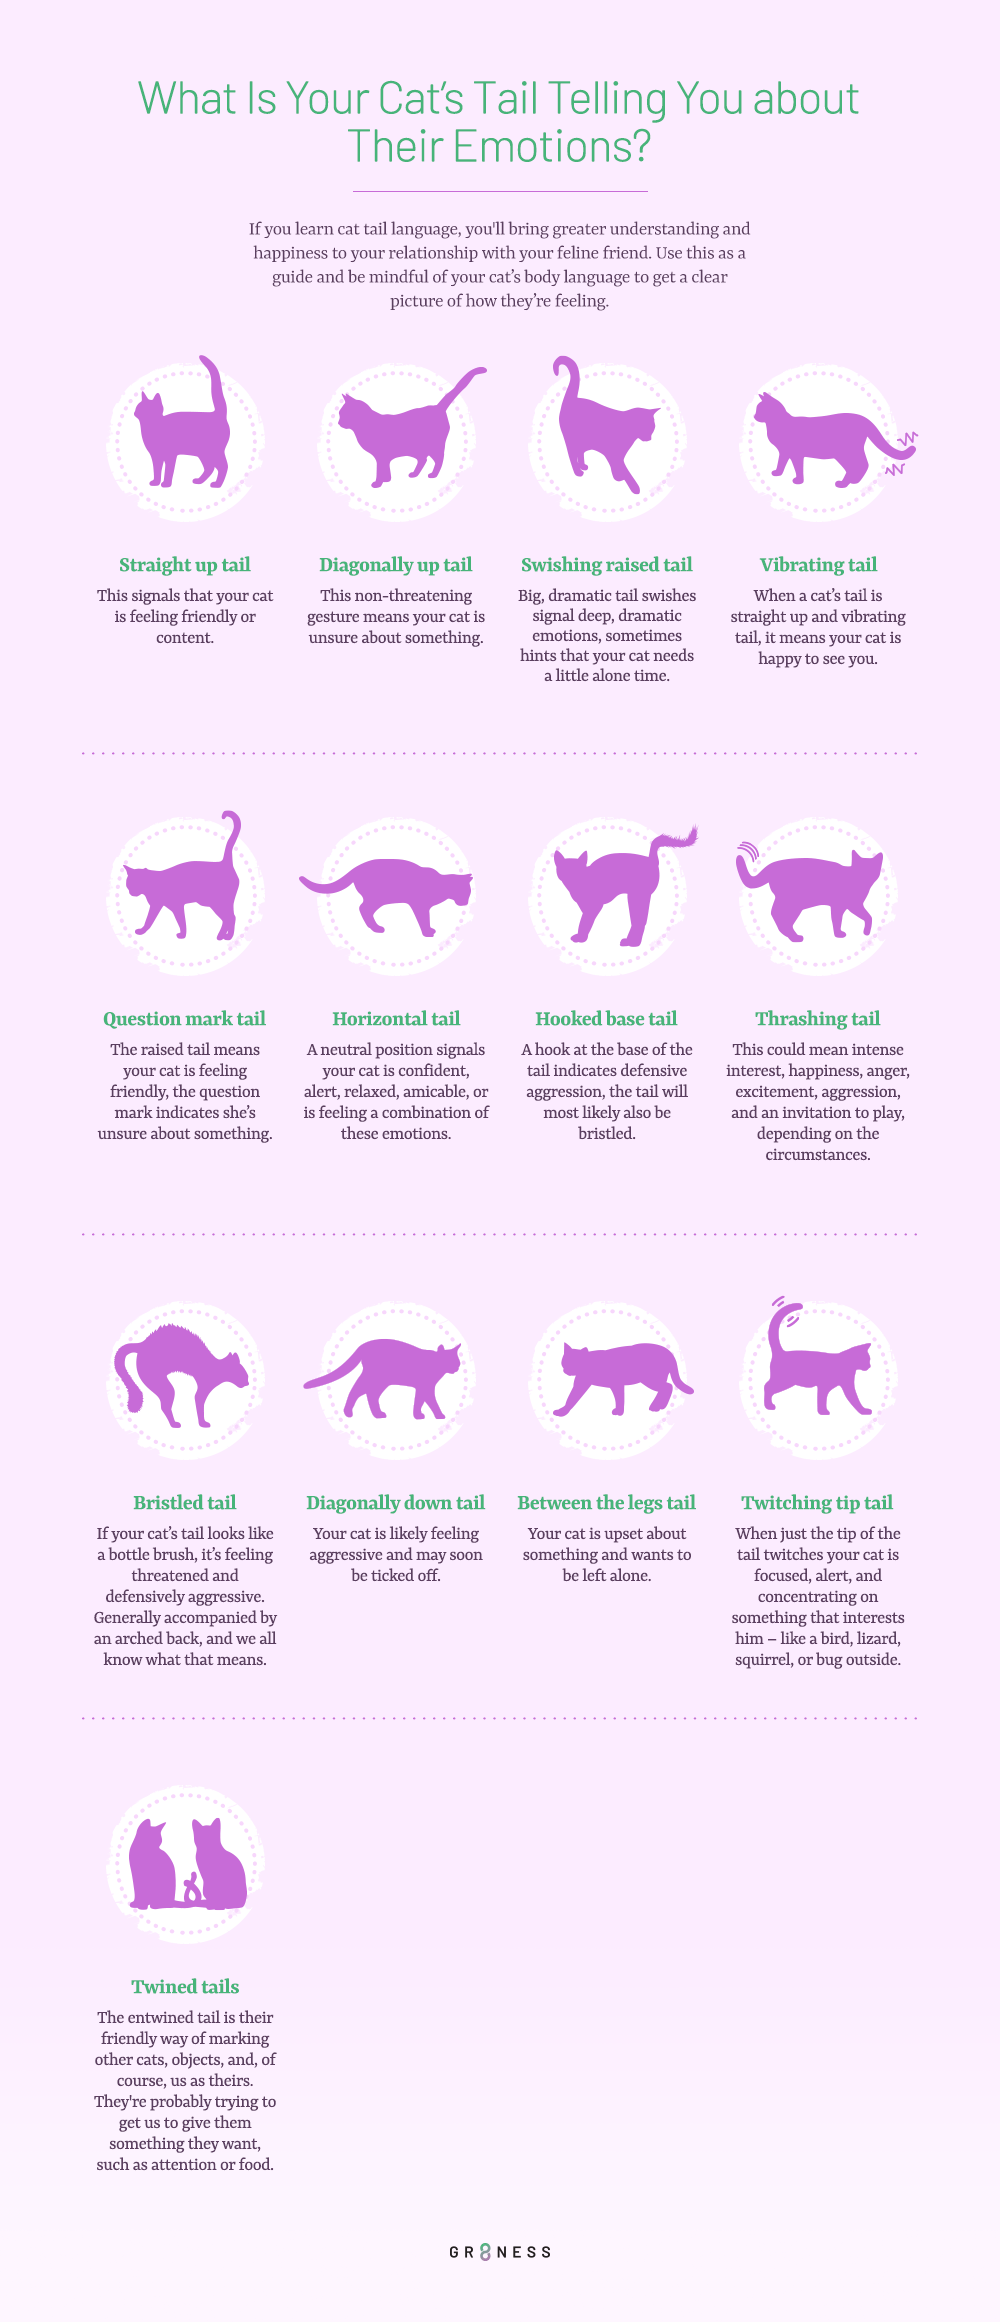 A list of differing cat tail positions that represent a different cat emotion